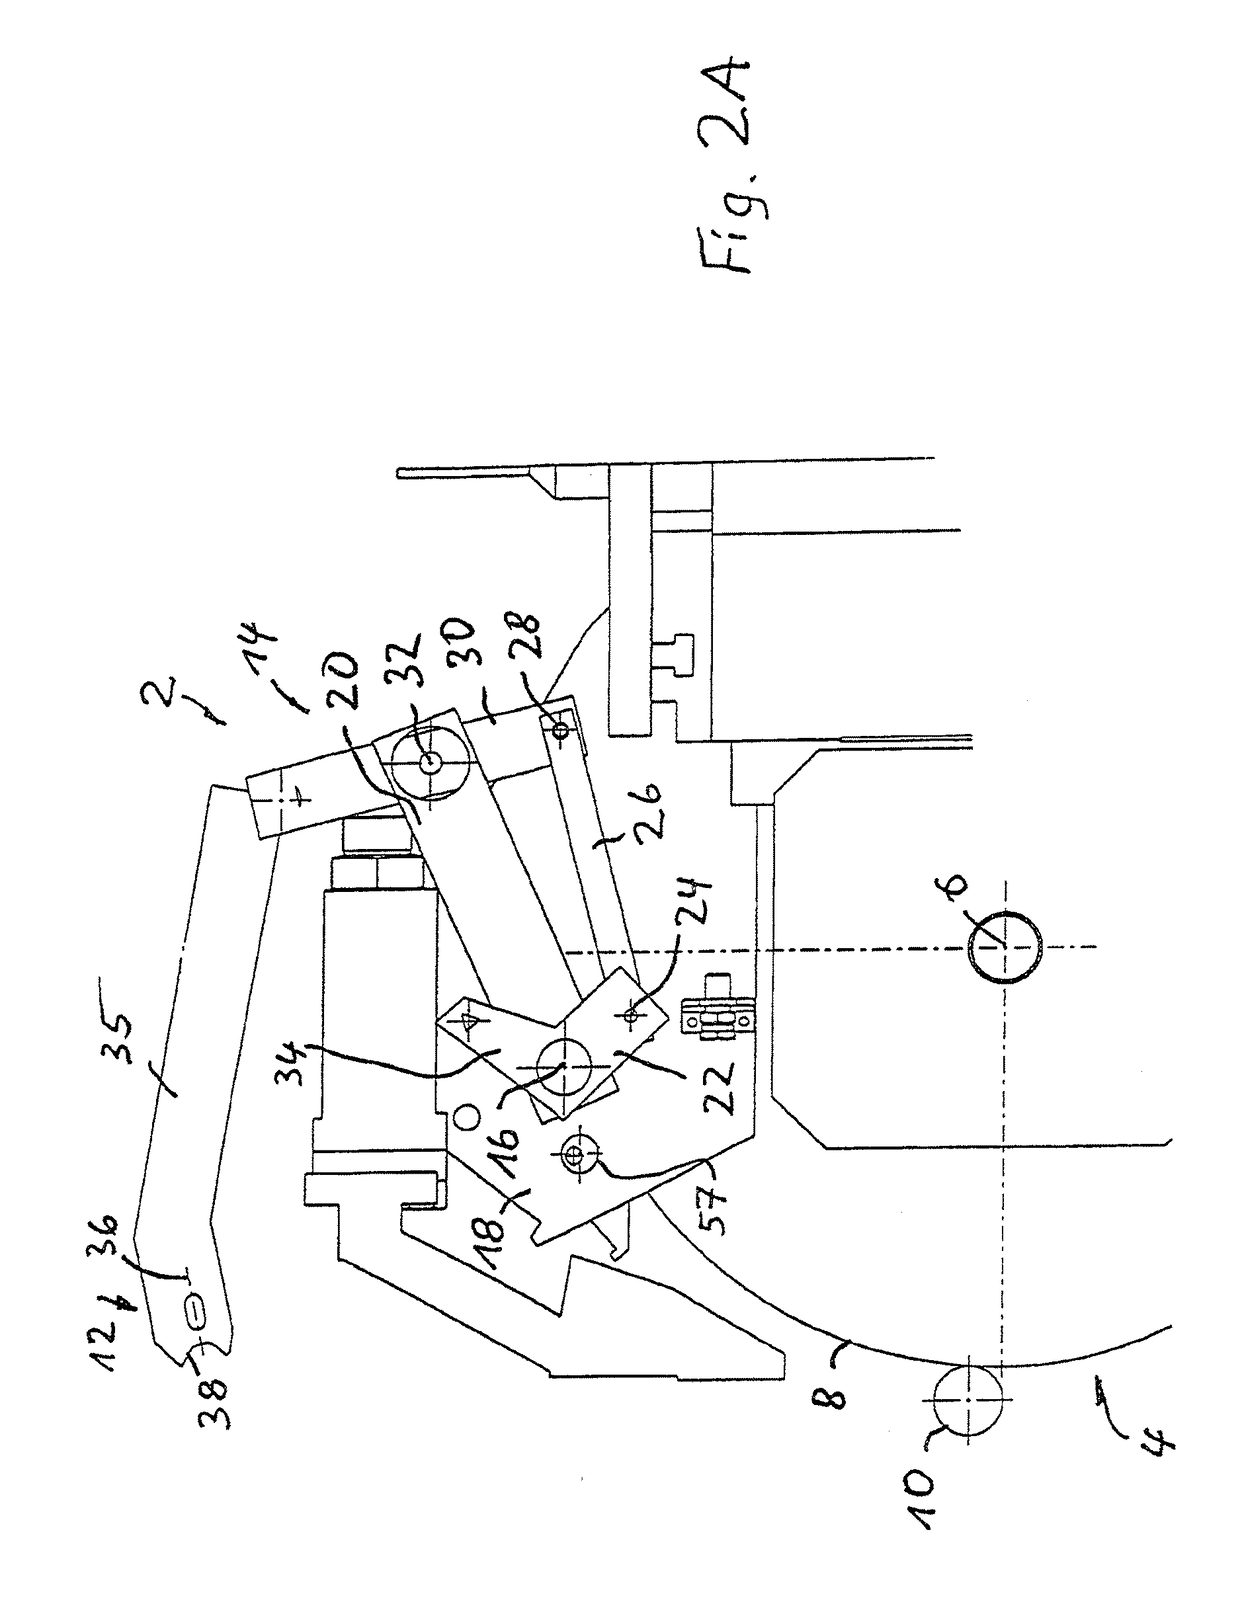 Roundness and/or dimension measuring device